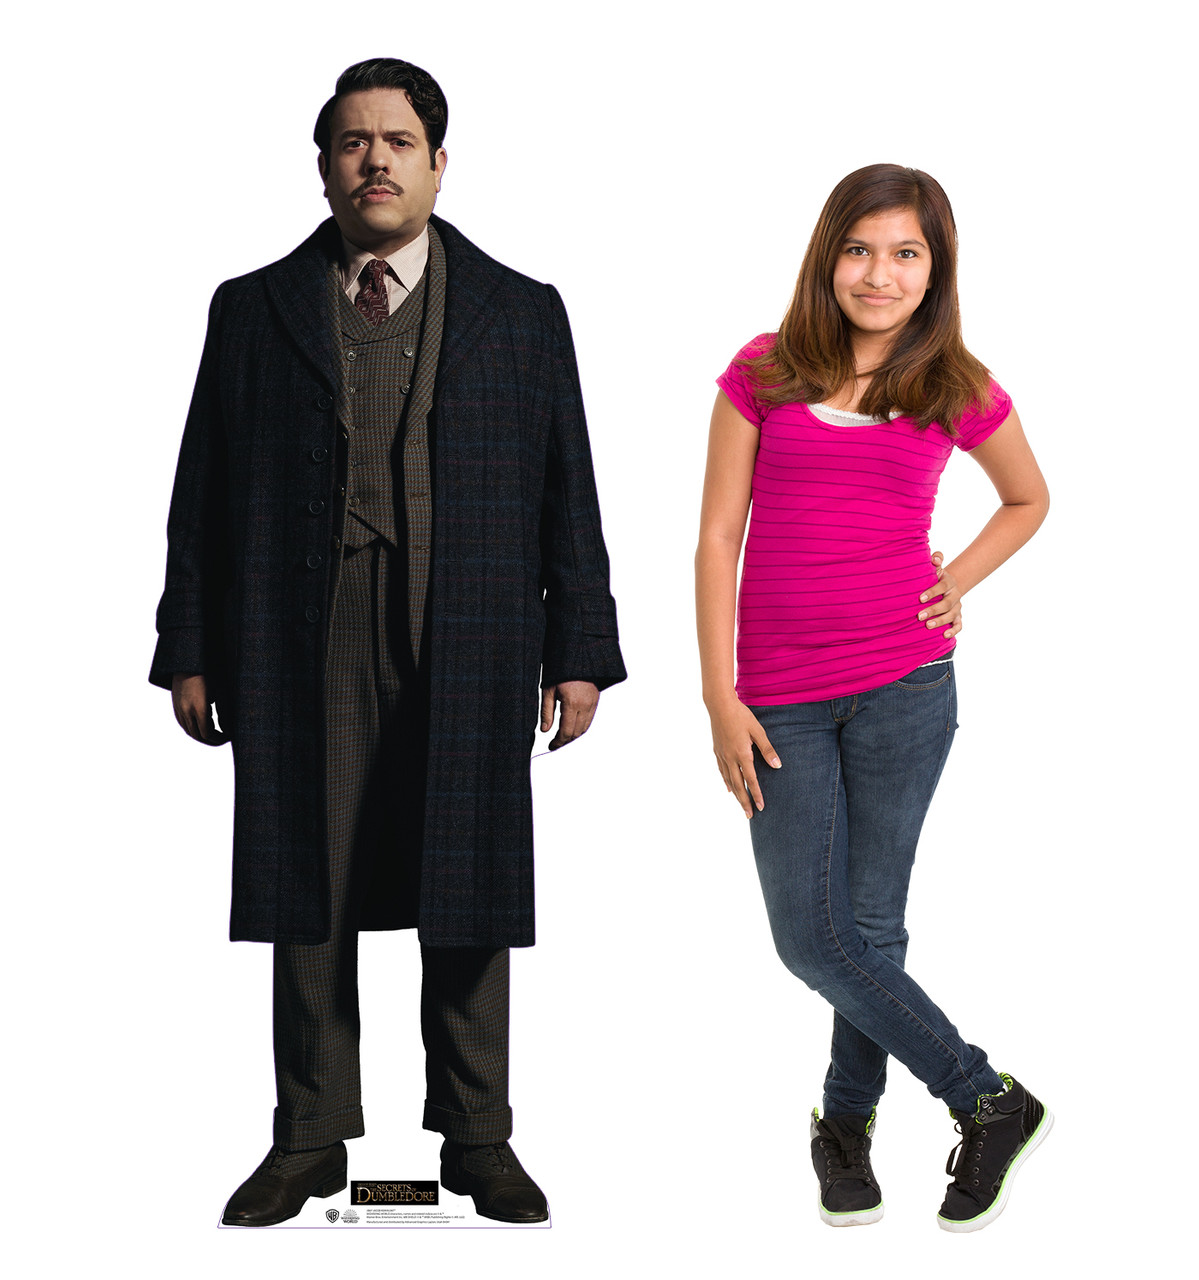 Life-size cardboard standee of Jacob Kowalski from Fantastic Beasts The Secrets of Dumbledore with model.